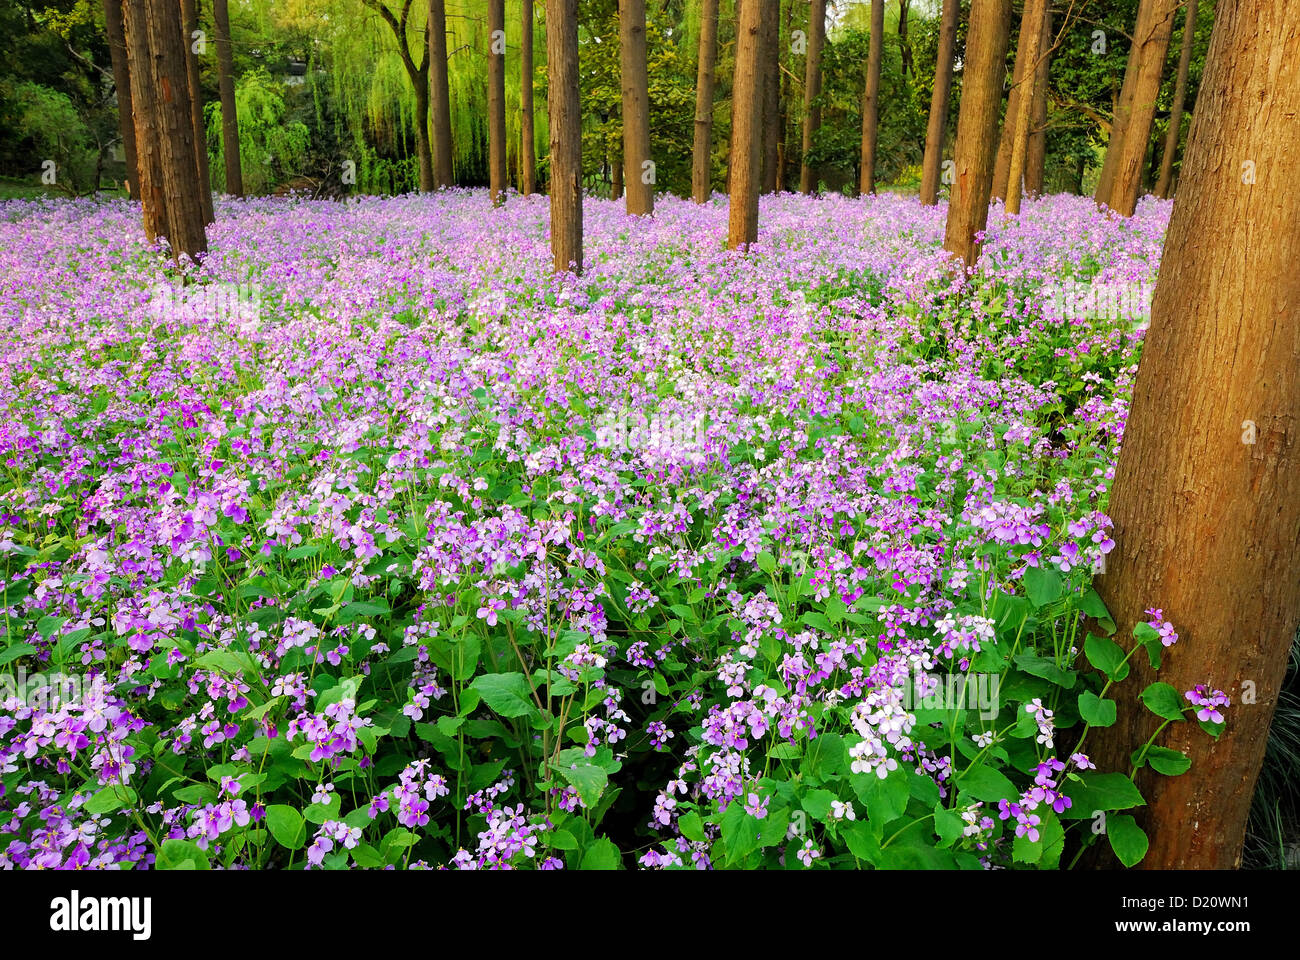 Outdoor nature landscape scenery of deep woodland surrounded by heavy purple colored wildflower. Stock Photo